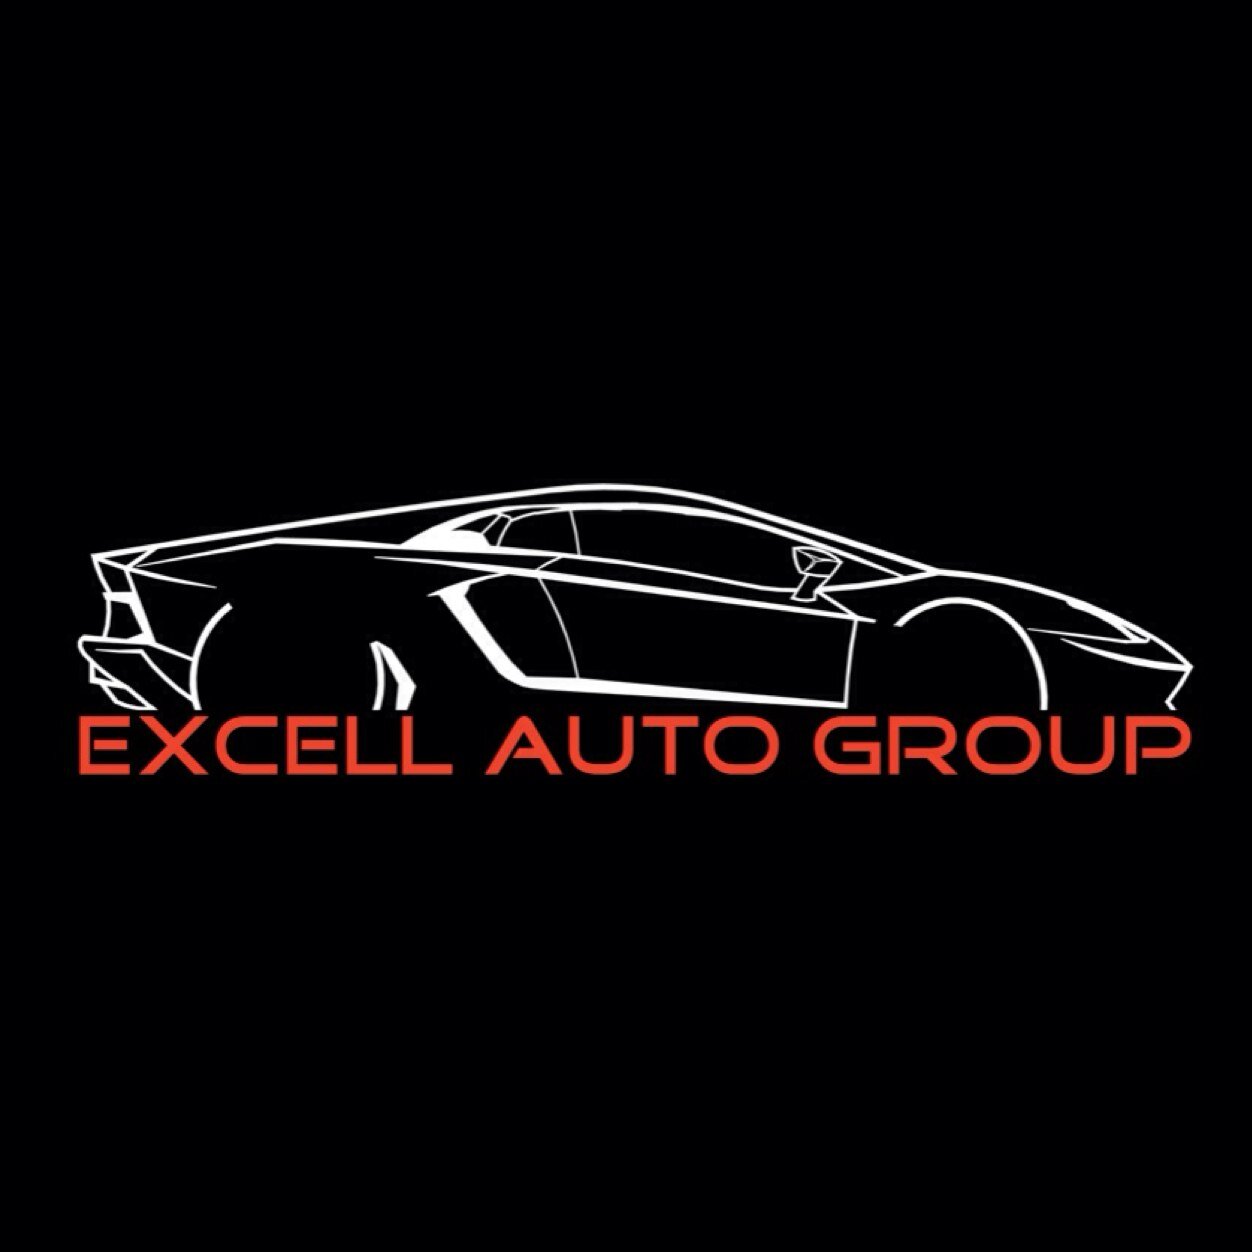 Excell Auto Group • The finest Luxury and Exotic Automobiles in the World • Dream it, Live it! #ExcellAuto